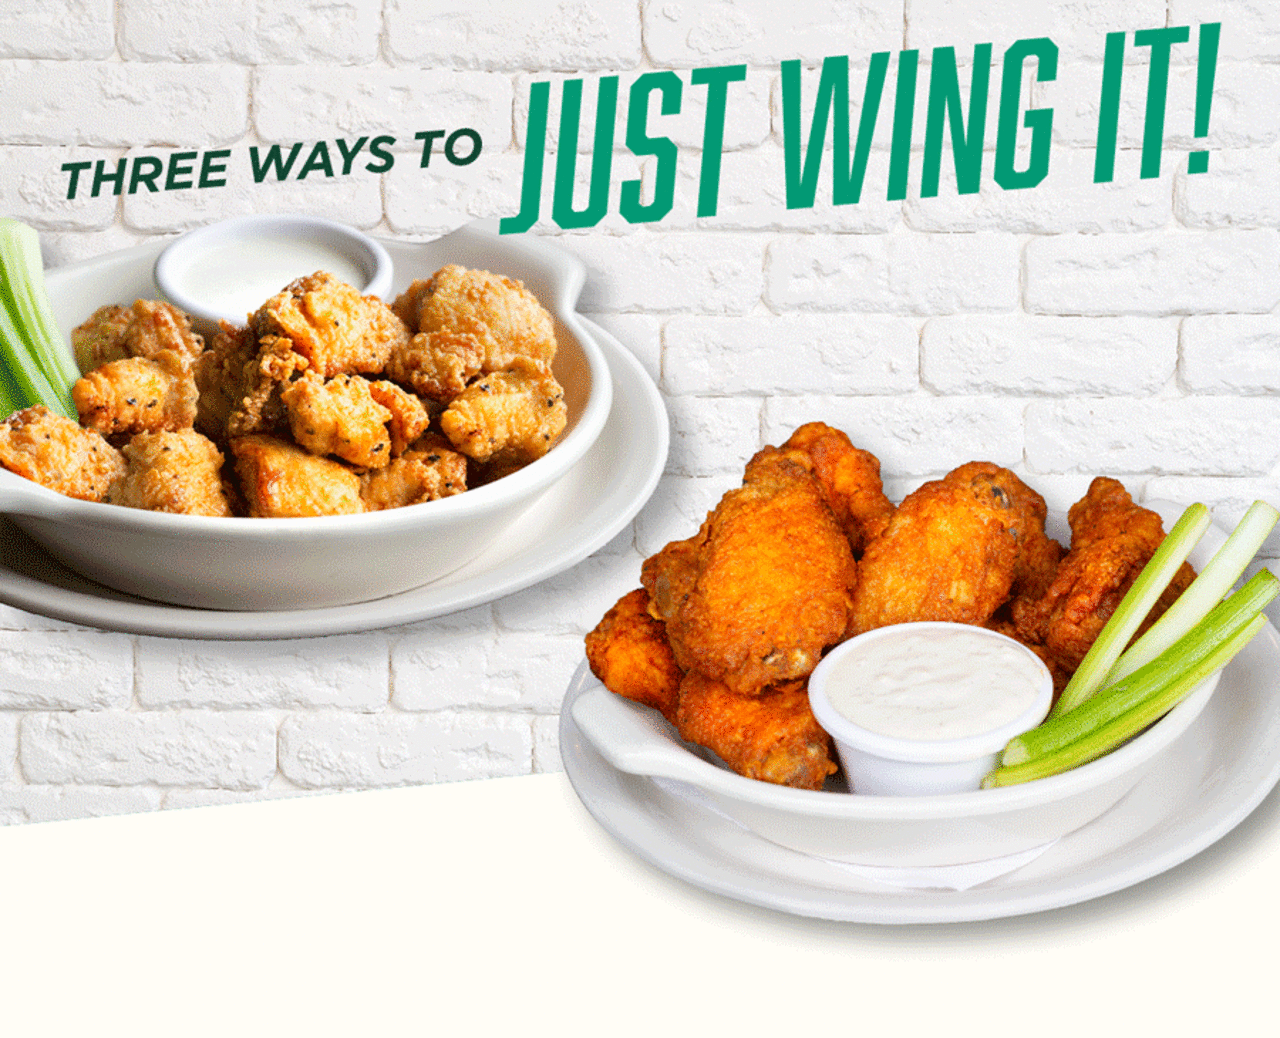 3 Ways to Just Wing It!